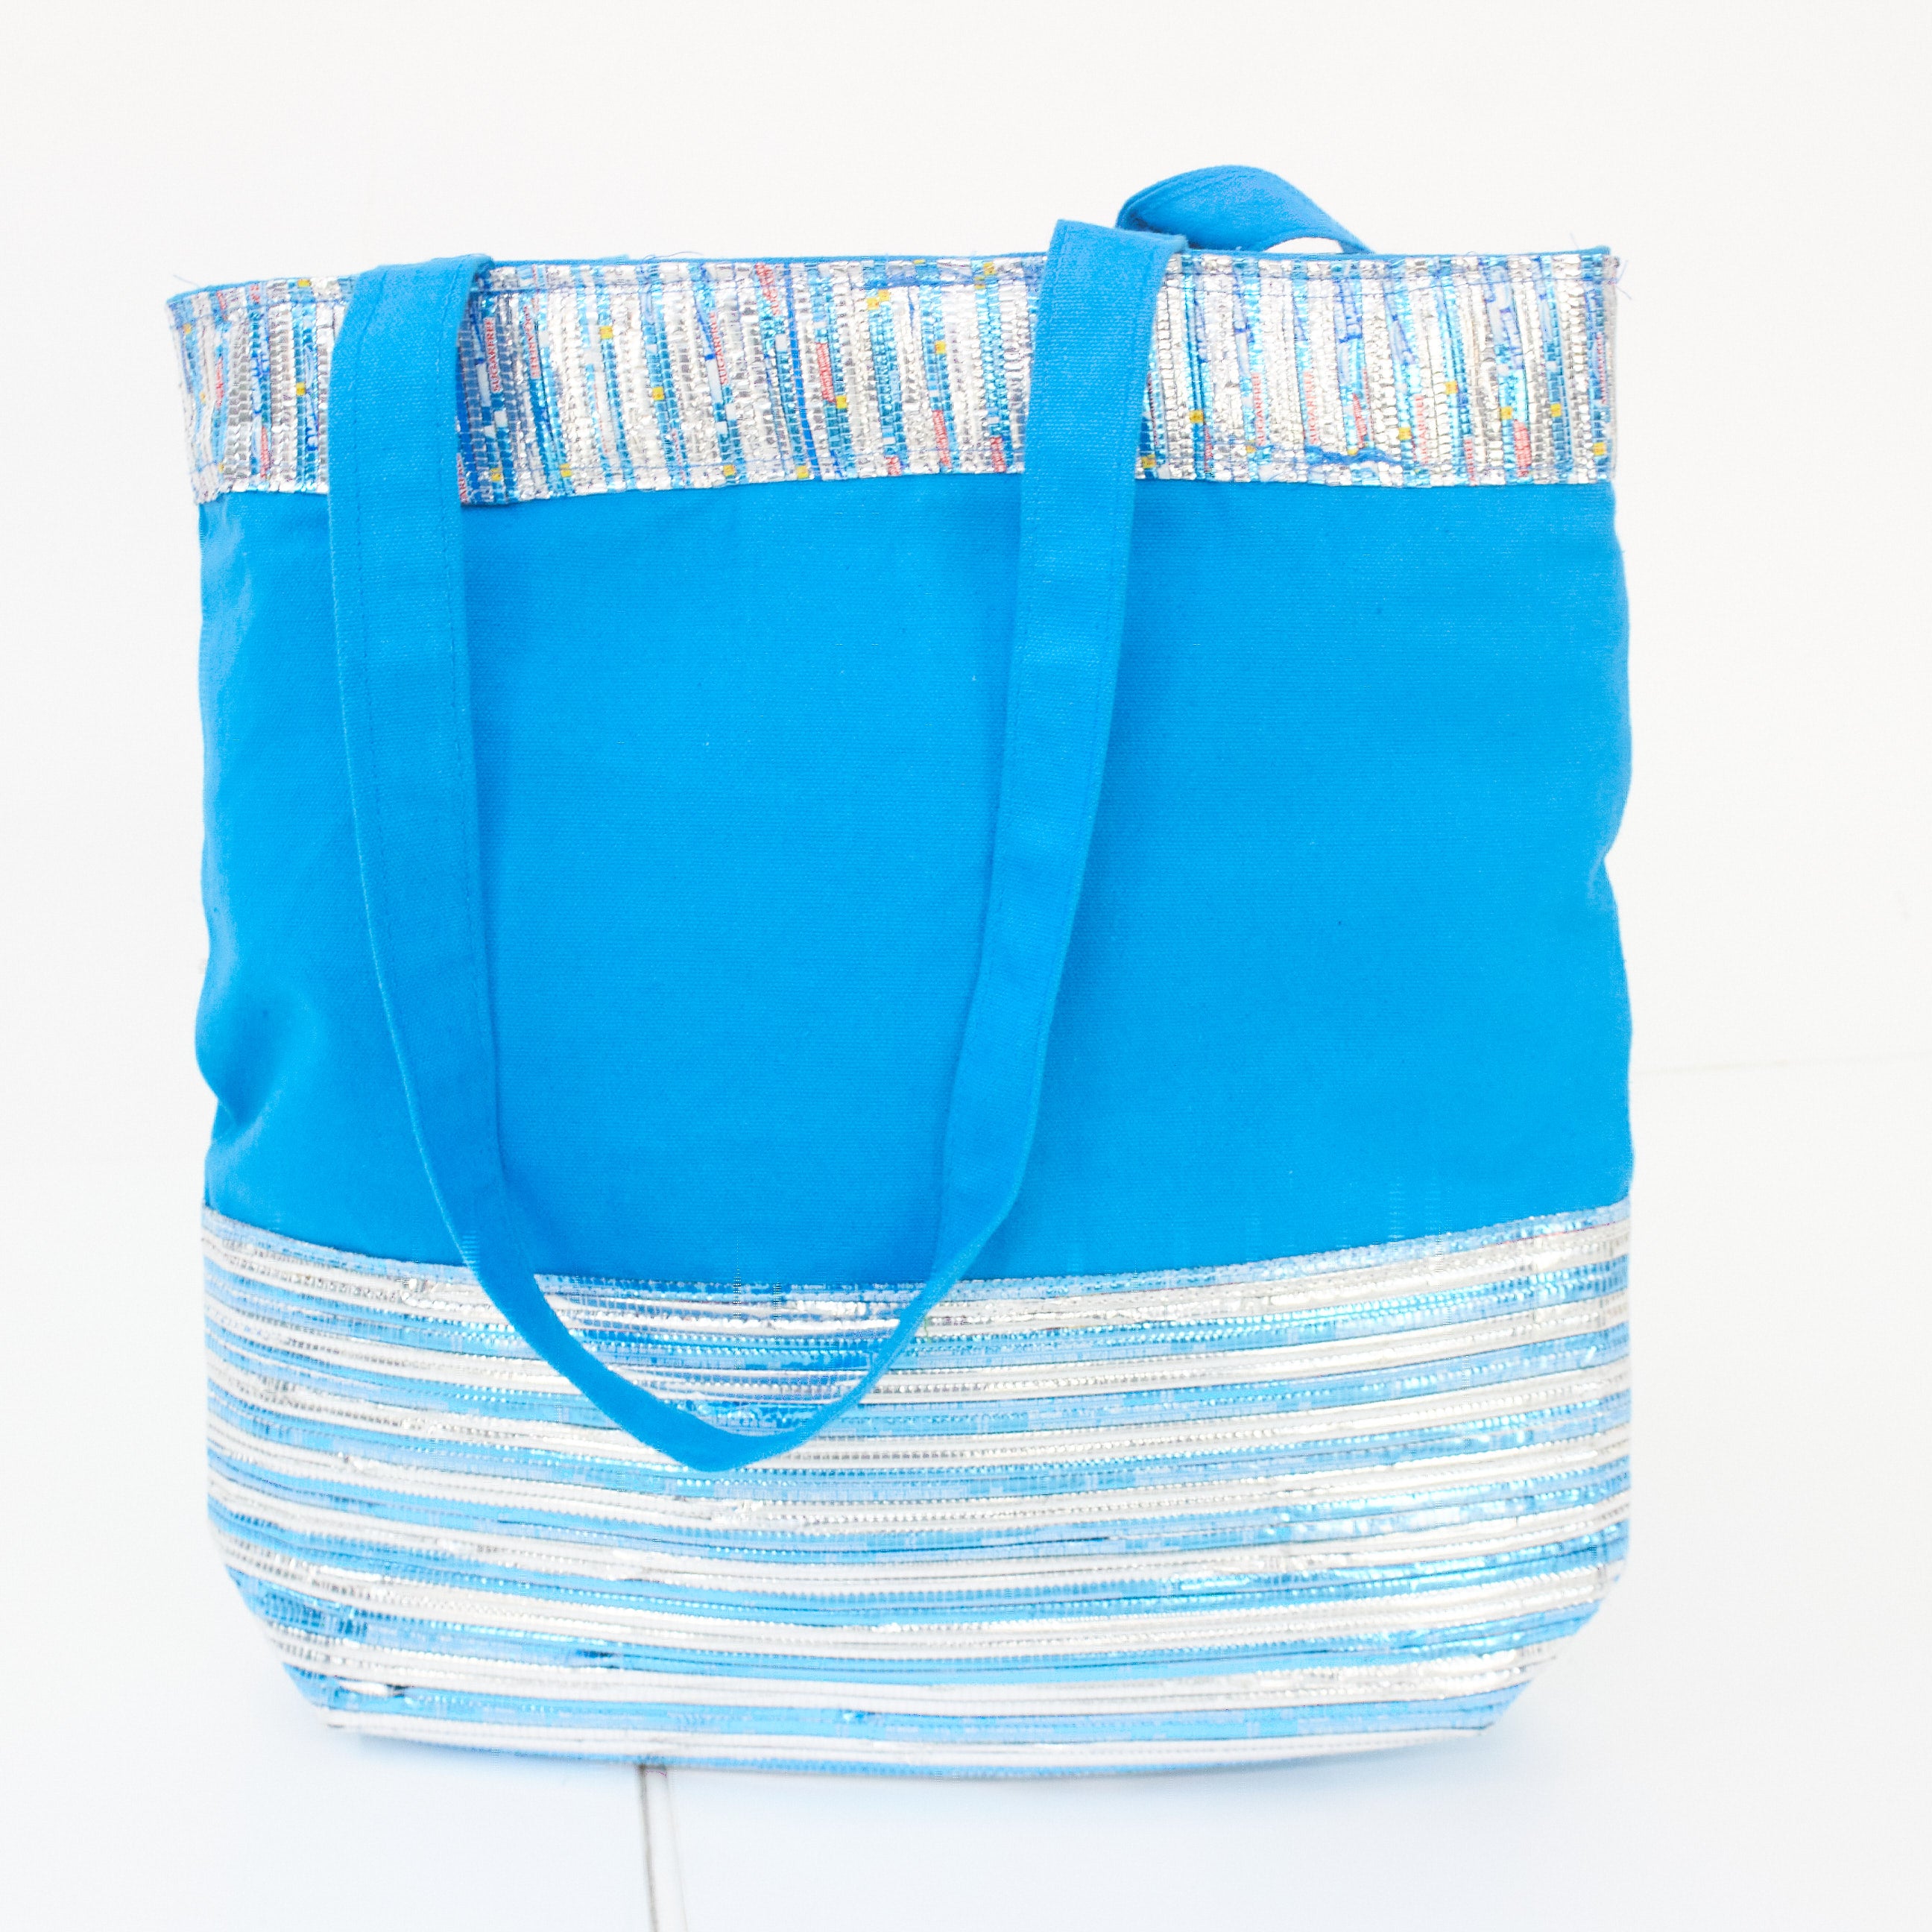 Mexican Tote Bag. Recycled Plastic Bag. Mexican Bag With Tassel. Multicolor  Bag. Cute Purse. Mexican Artisanal Purse. Handmade Bag. - Etsy | Recycled  plastic bags, Plastic handbag, Mexican bag